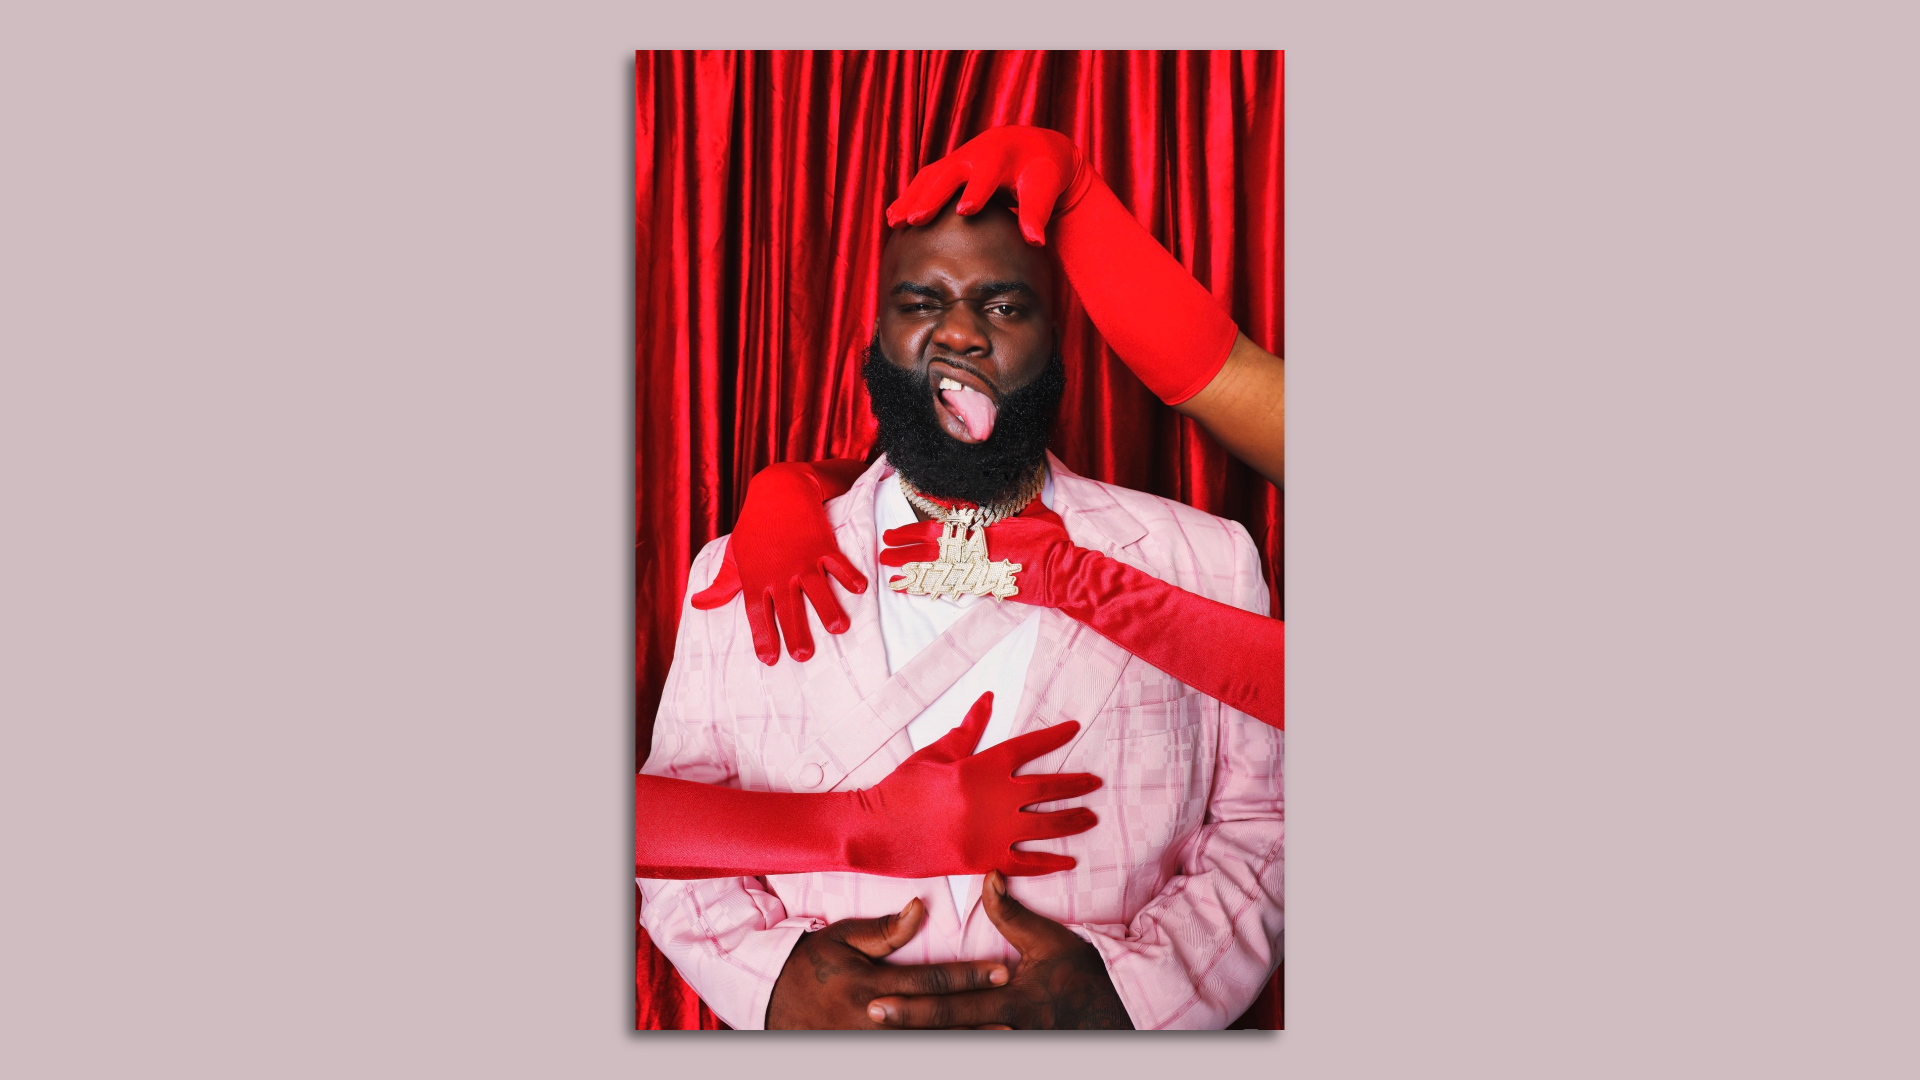 A headshot of New Orleans artist Ha Sizzle. He sticks his tongue out and is embraced by two sets of red-gloved hands belonging to unseen people.